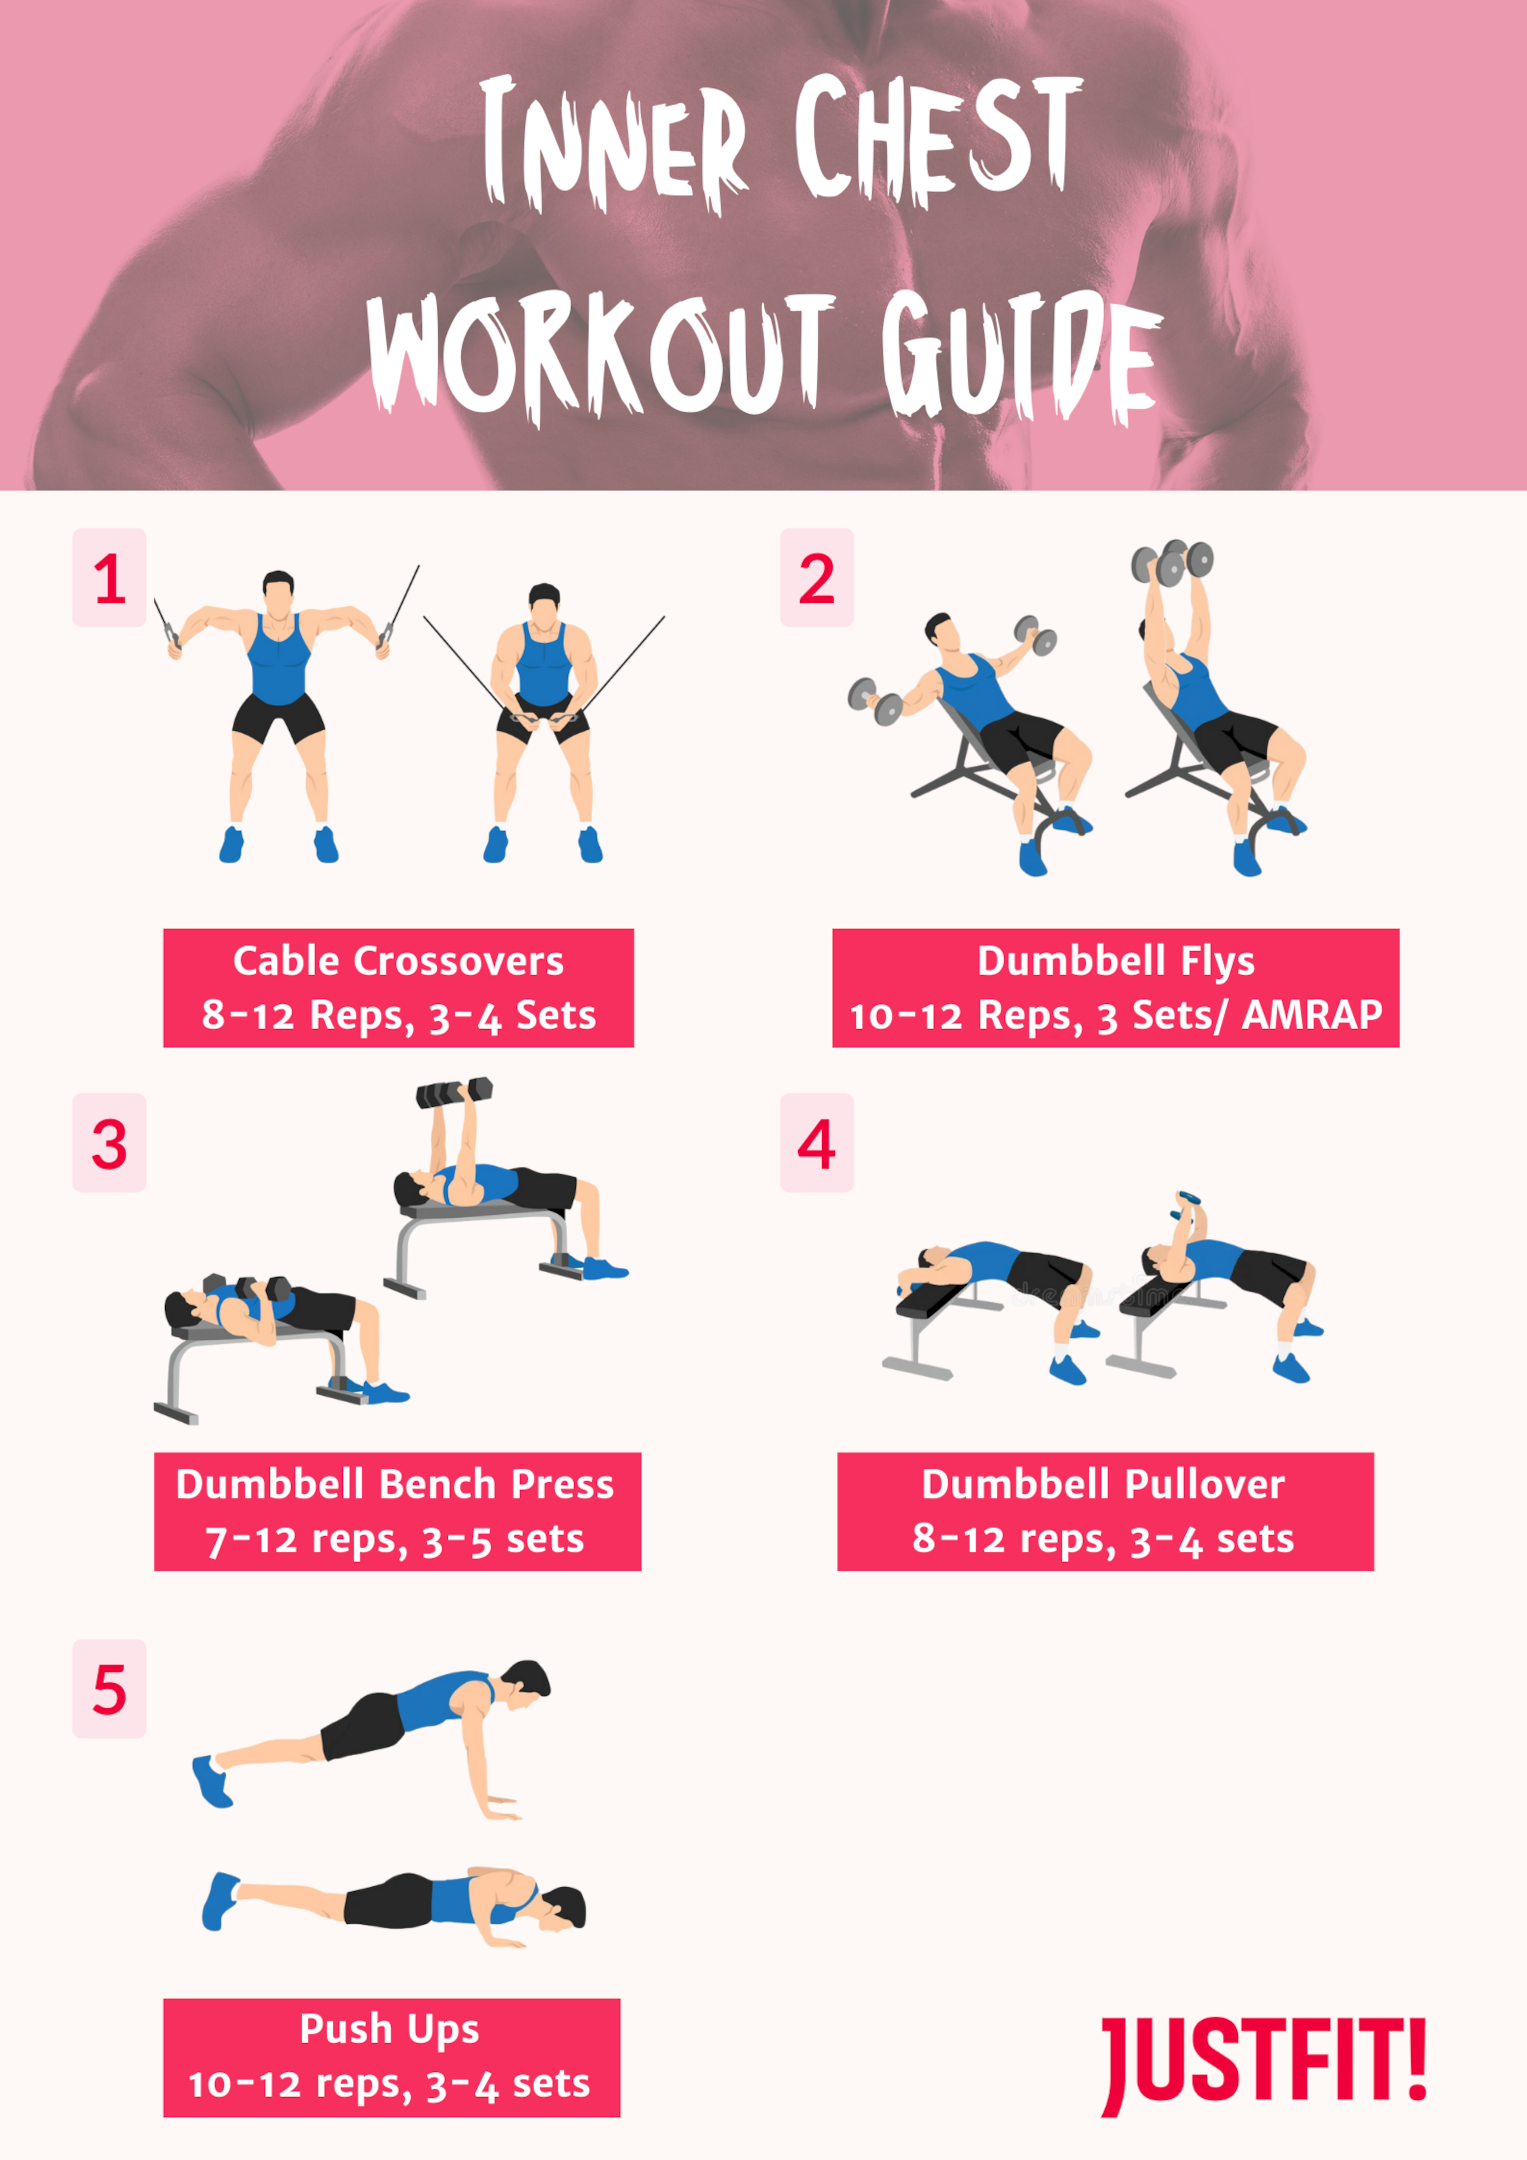 inner chest workout guide
